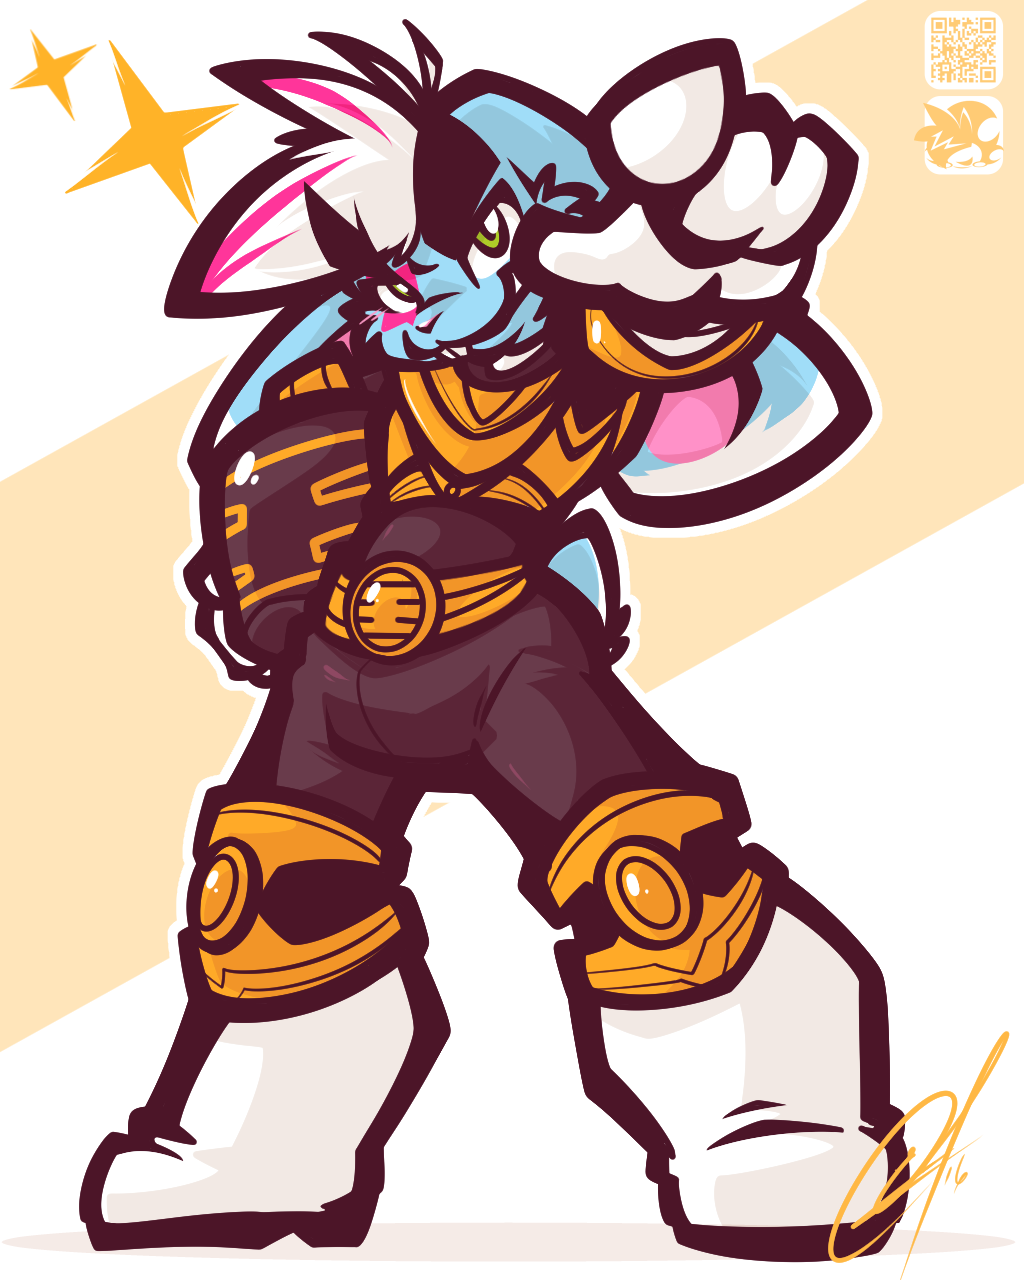 [CHUMMISSION] - MIGHTY GOLD BUNNY